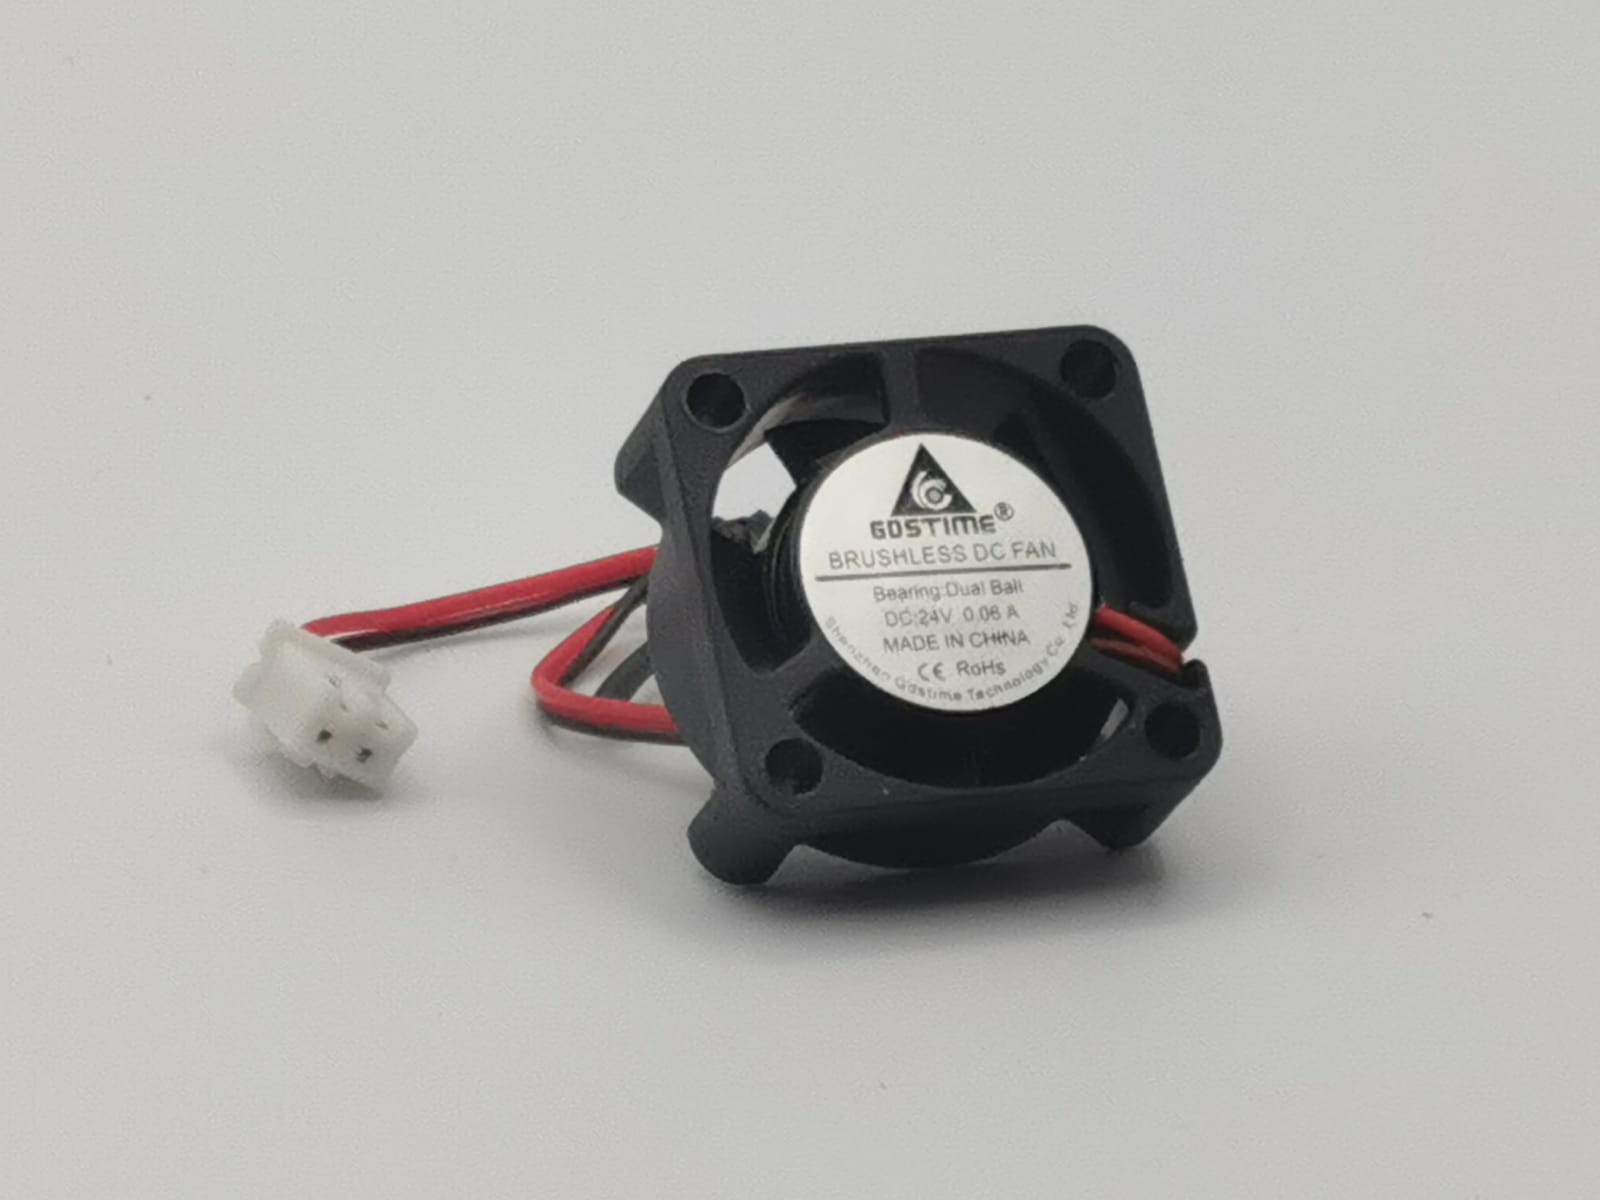 Brushless DC 2510 Axial Fans (2 pack)